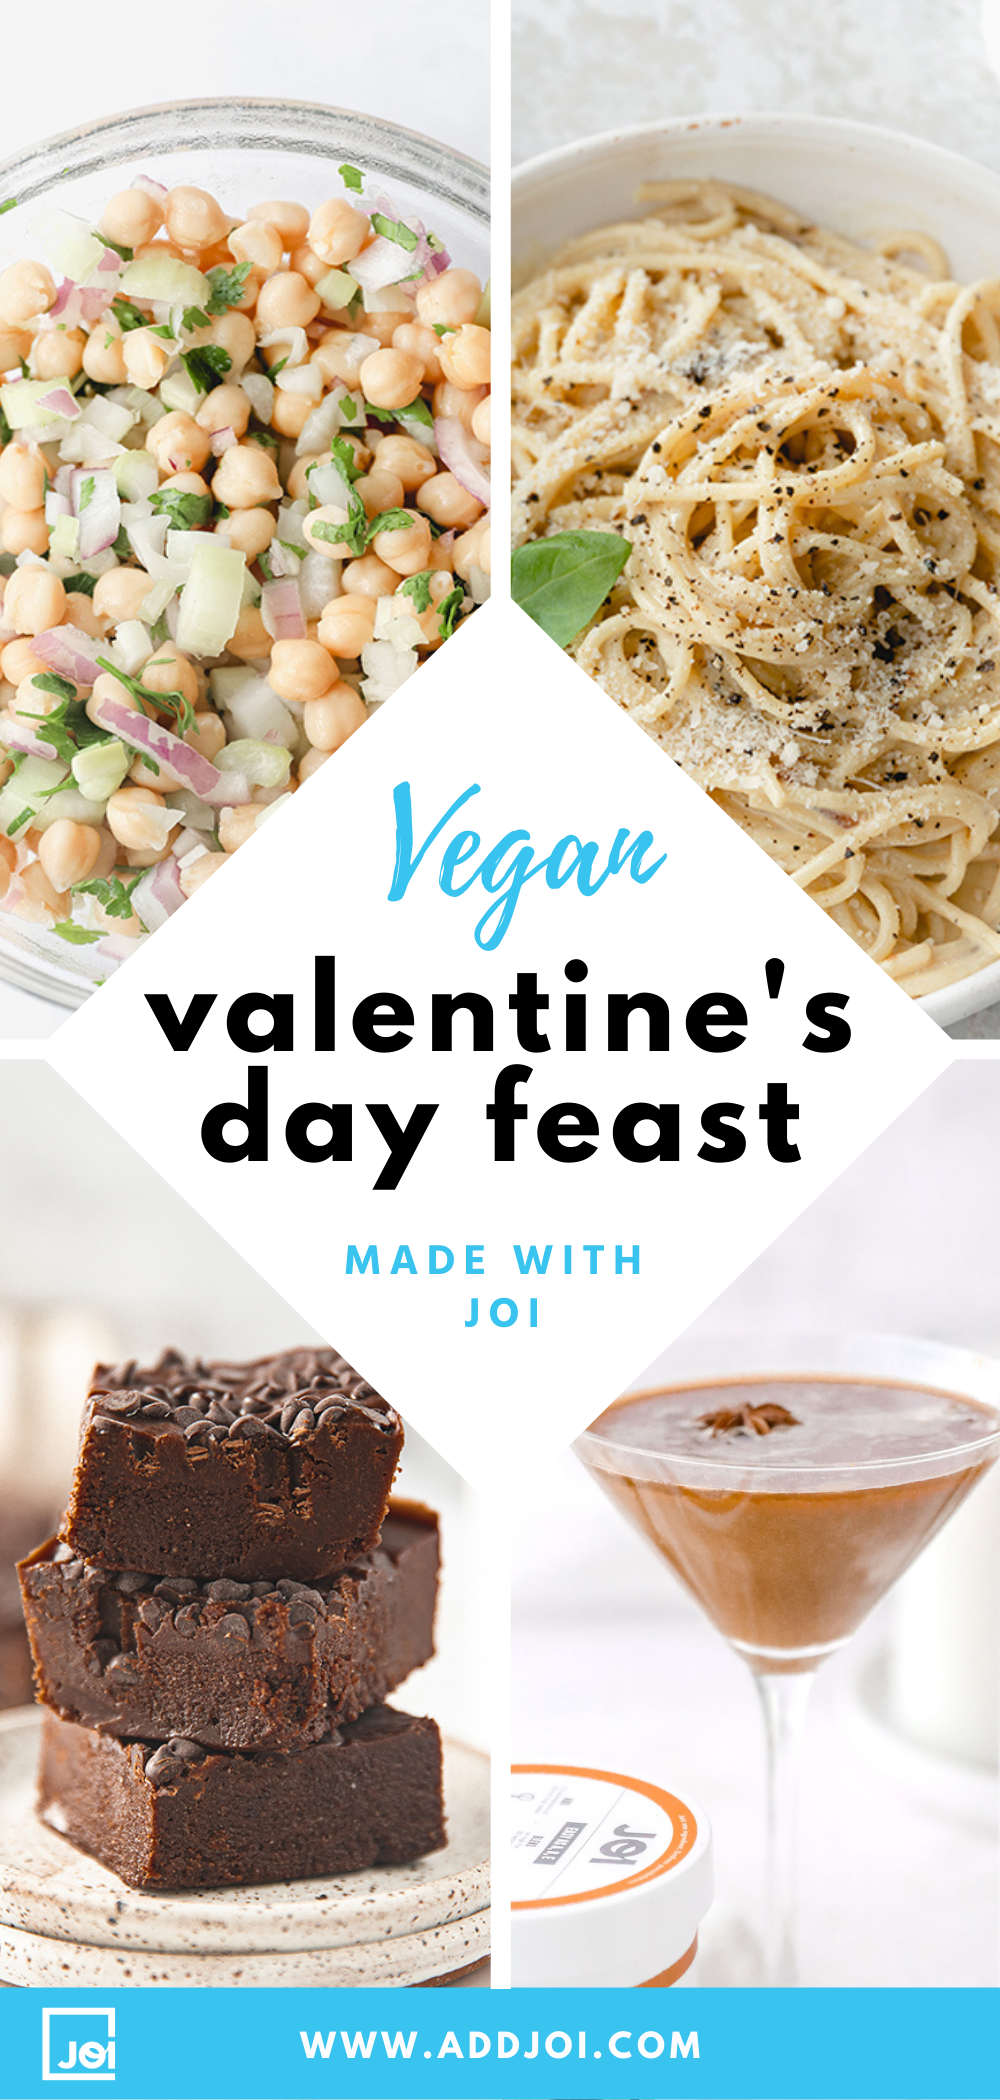 The Perfect Three Course Vegan Meal for Any Kind of Valentine’s Day Celebration